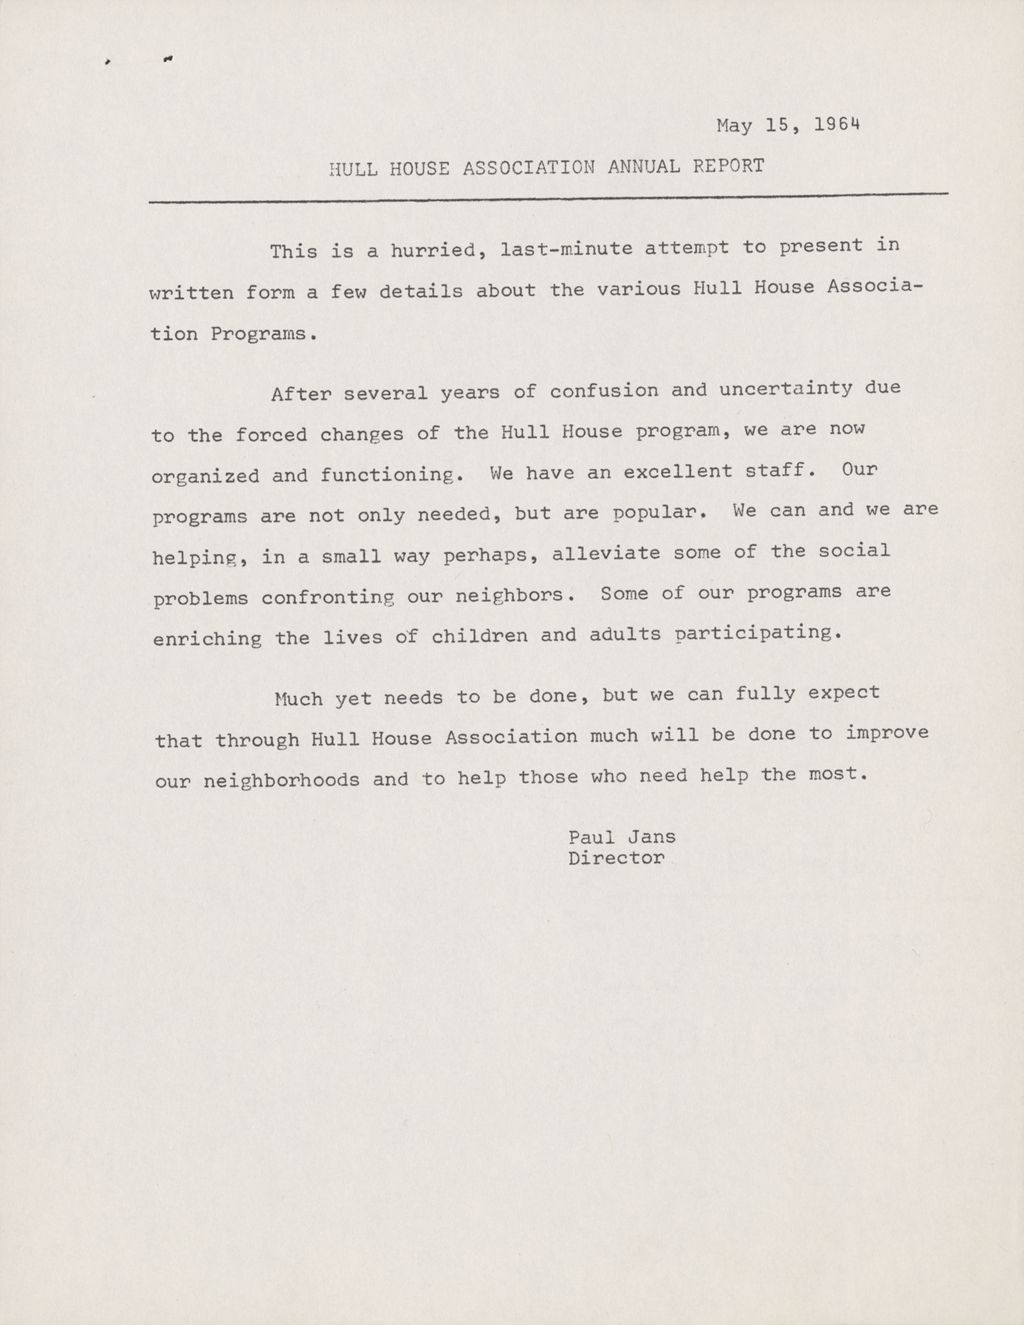 Miniature of Hull House Association, Annual Report, 1963